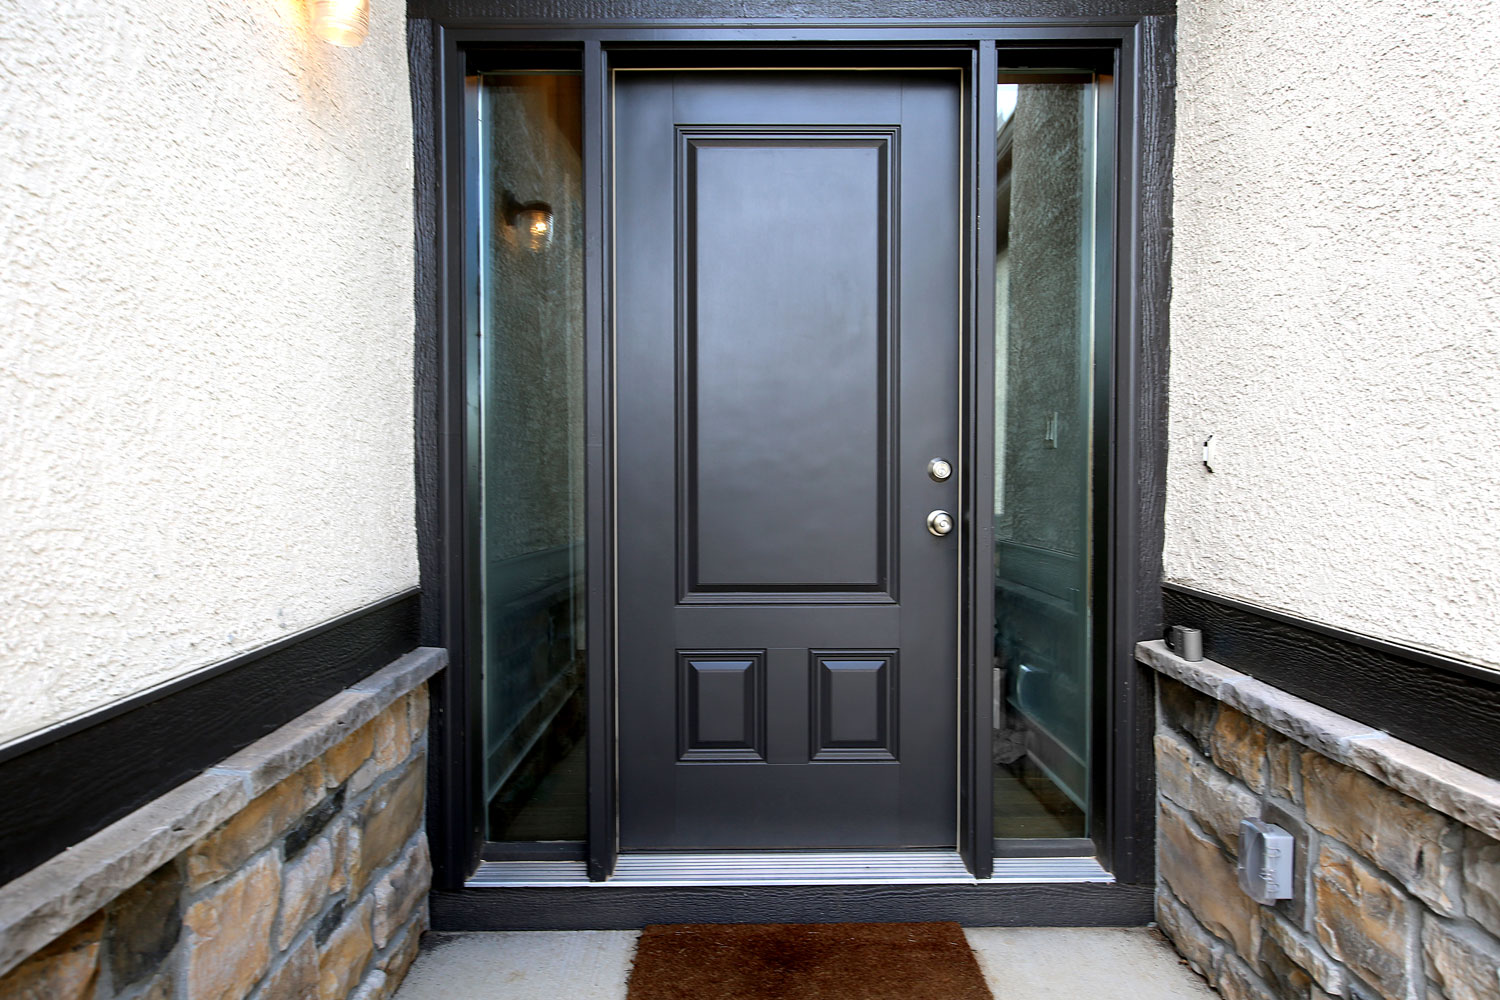 A black pivot door with glass panes on the sides